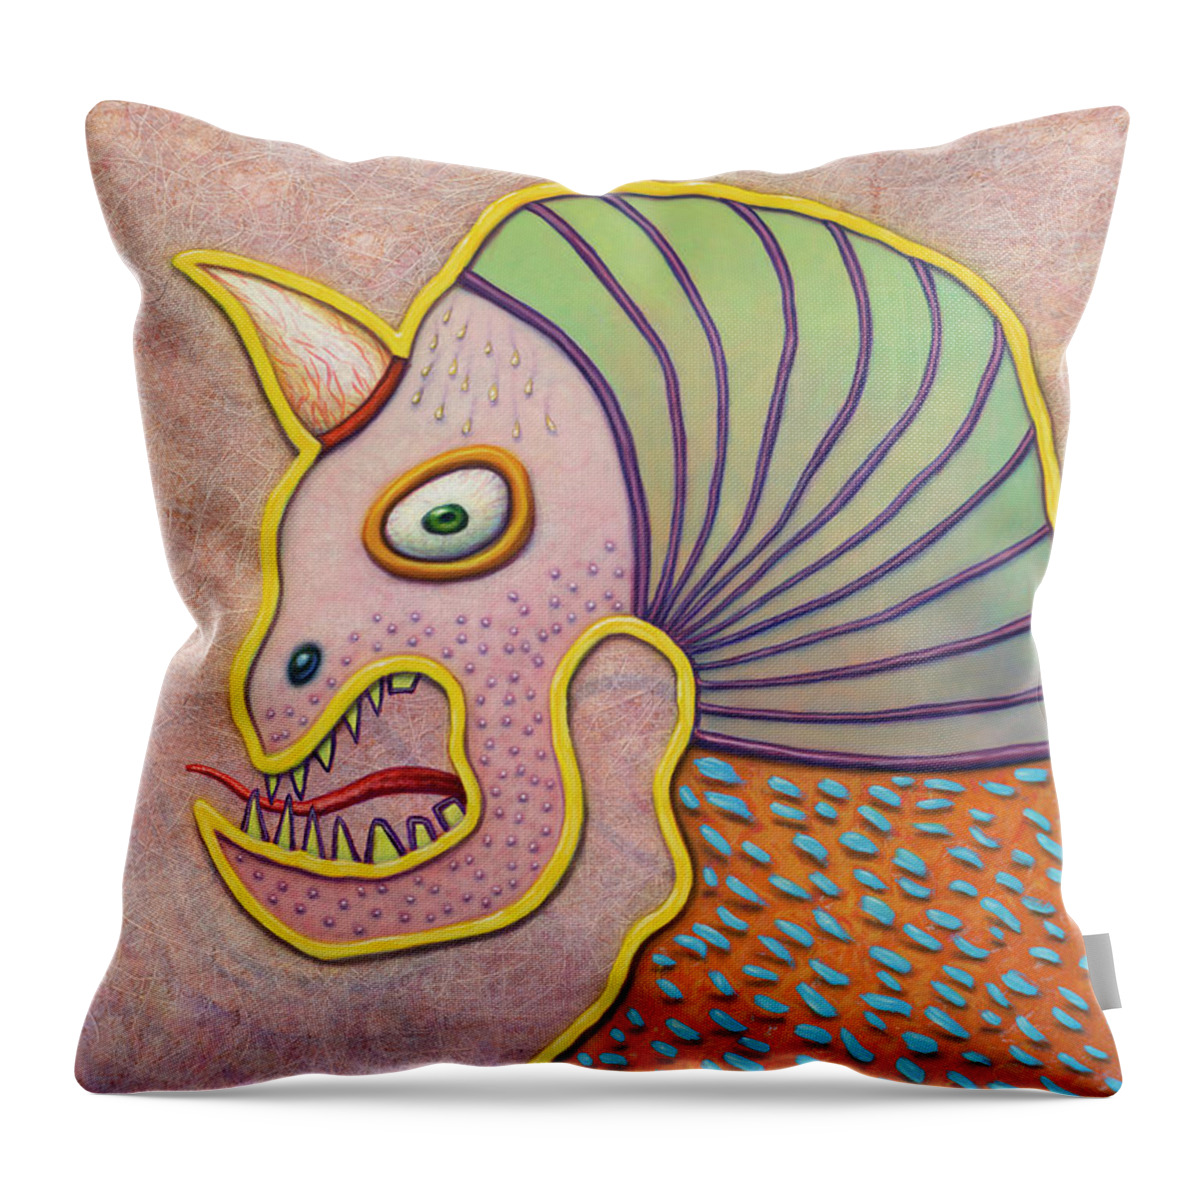 Horn Throw Pillow featuring the painting Unihorn by James W Johnson